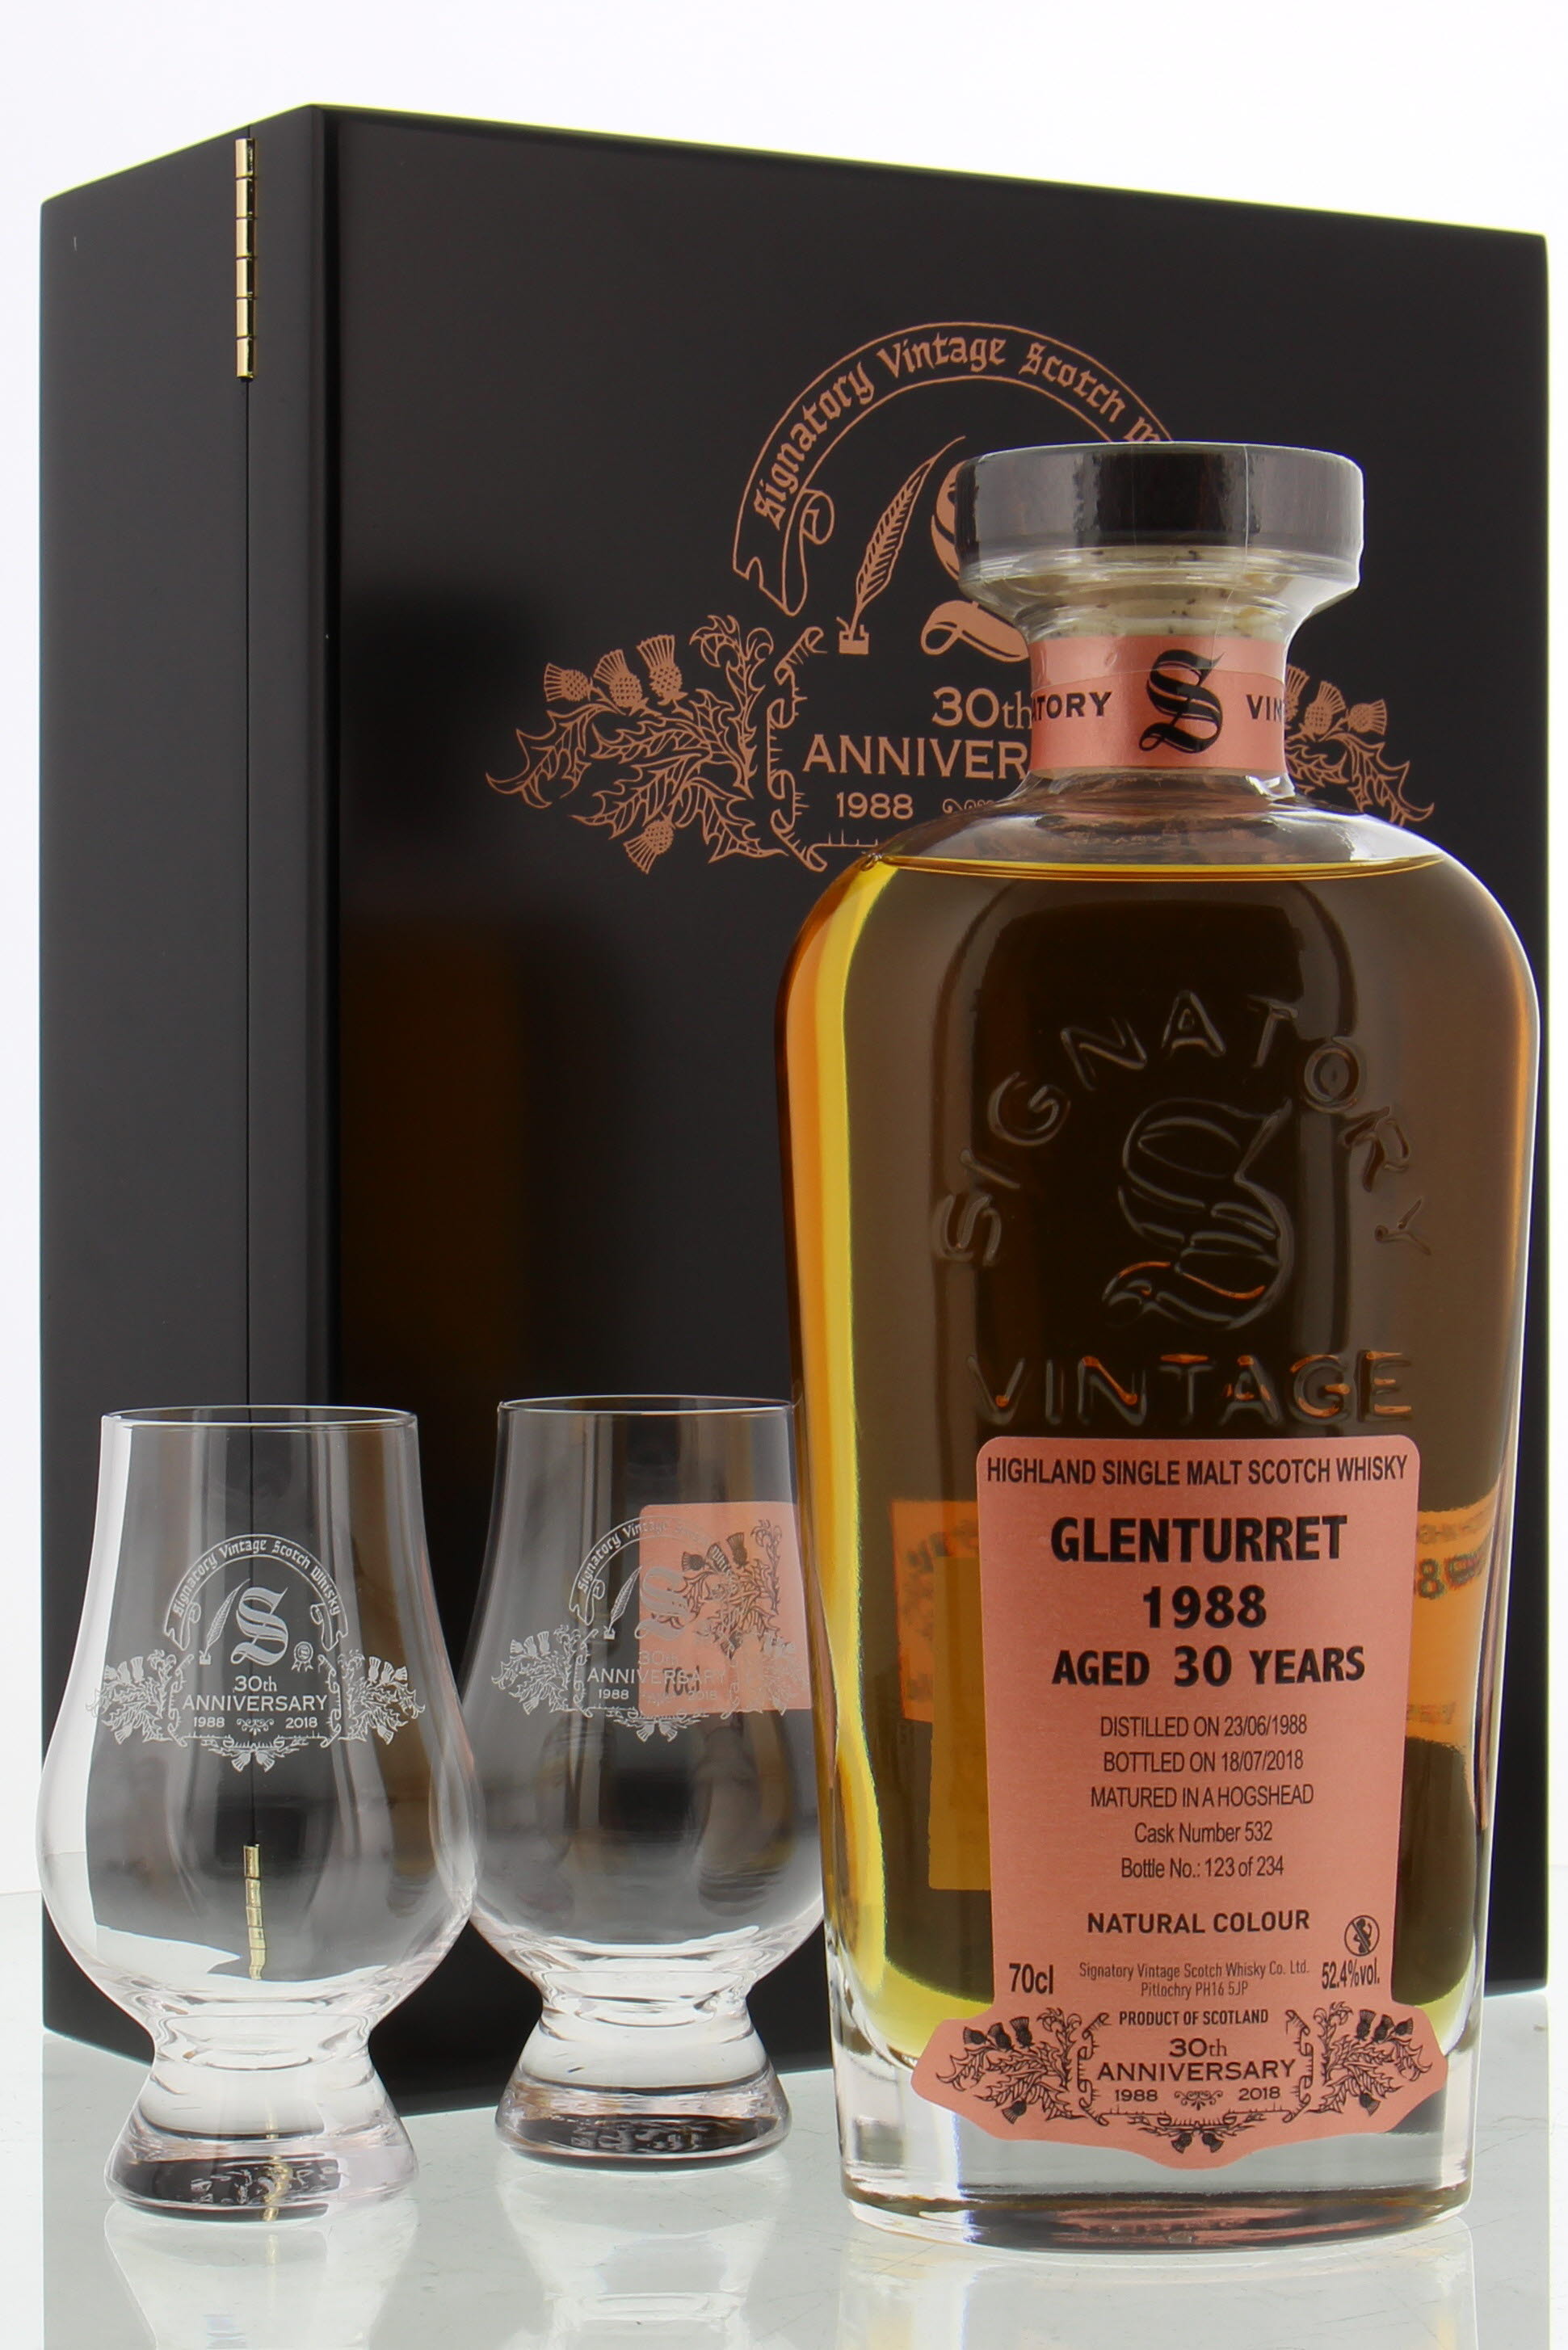 Glenturret - 30 Years Old Signatory 30th Anniversary Cask 532 52.4% 1988 In Original Wooden Container